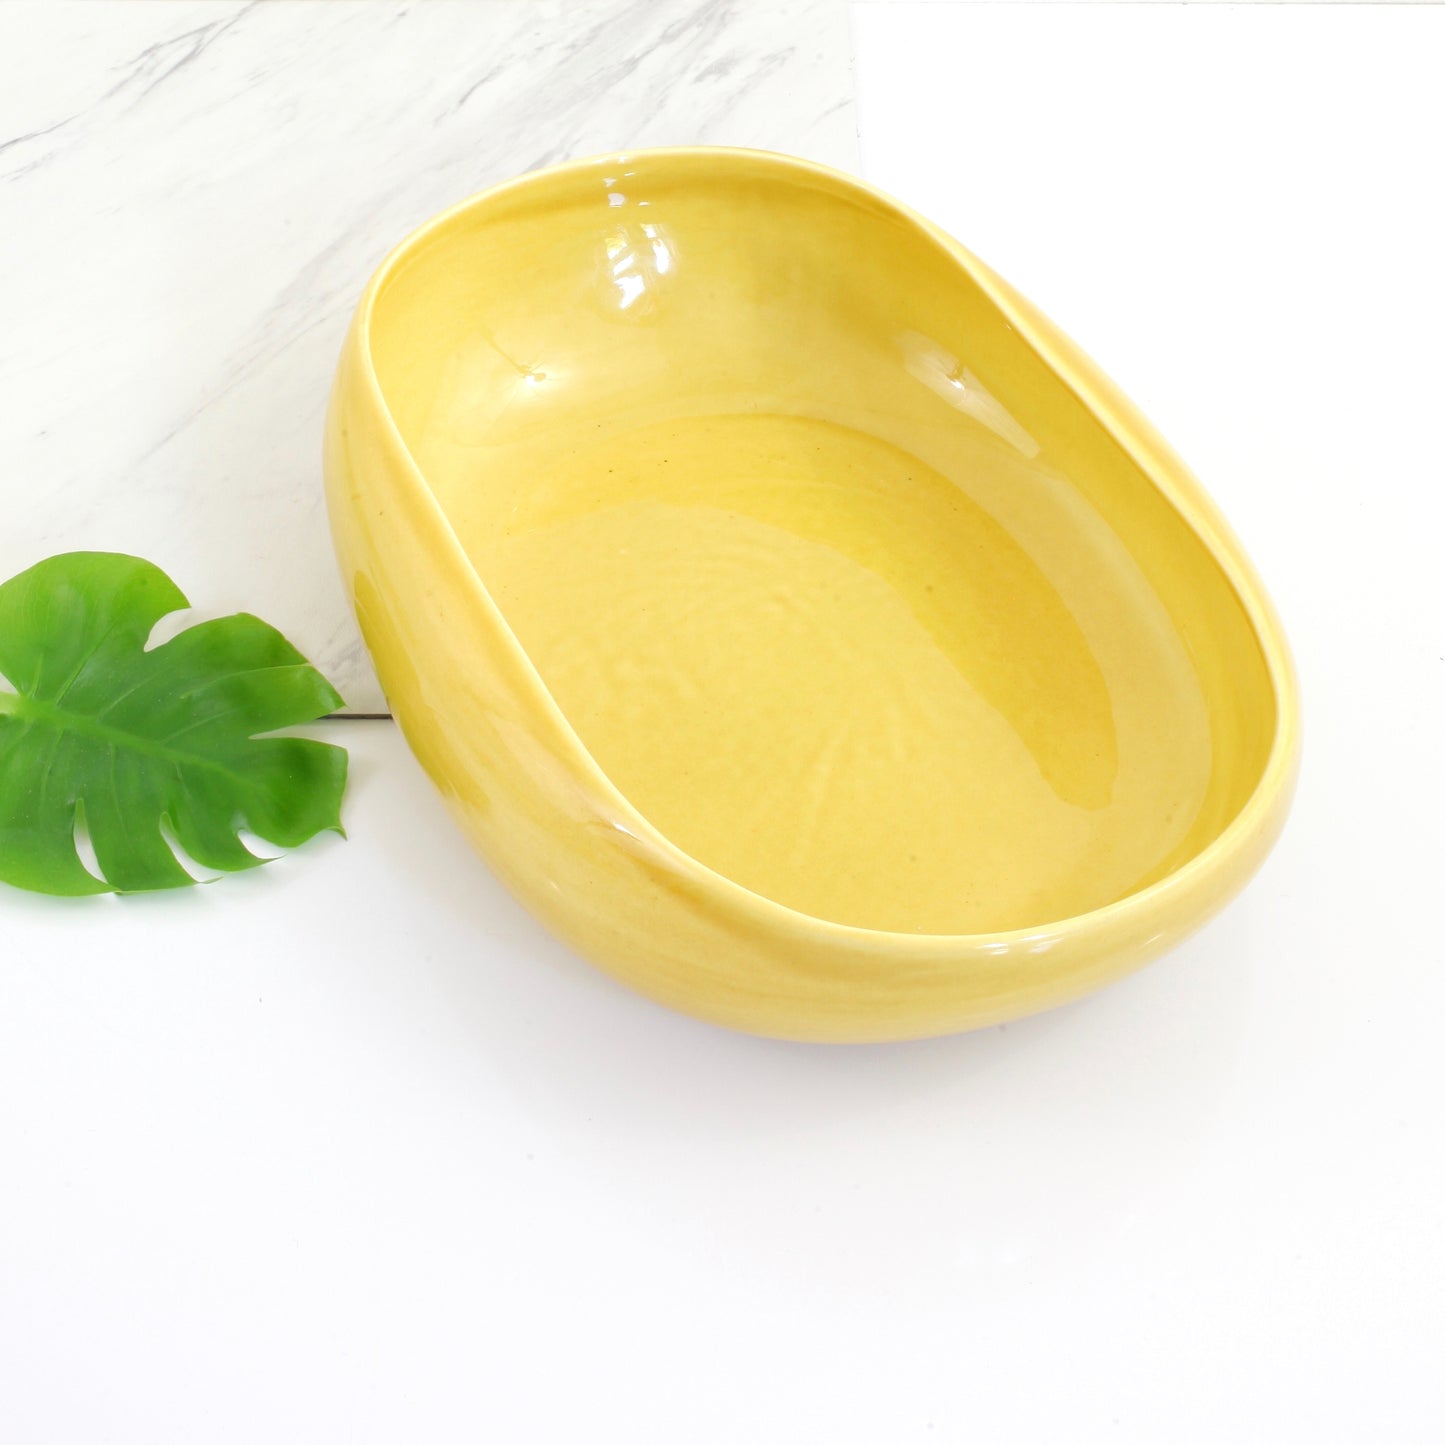 SOLD - Vintage Russel Wright Chartreuse American Modern Serving Bowl by Steubenville